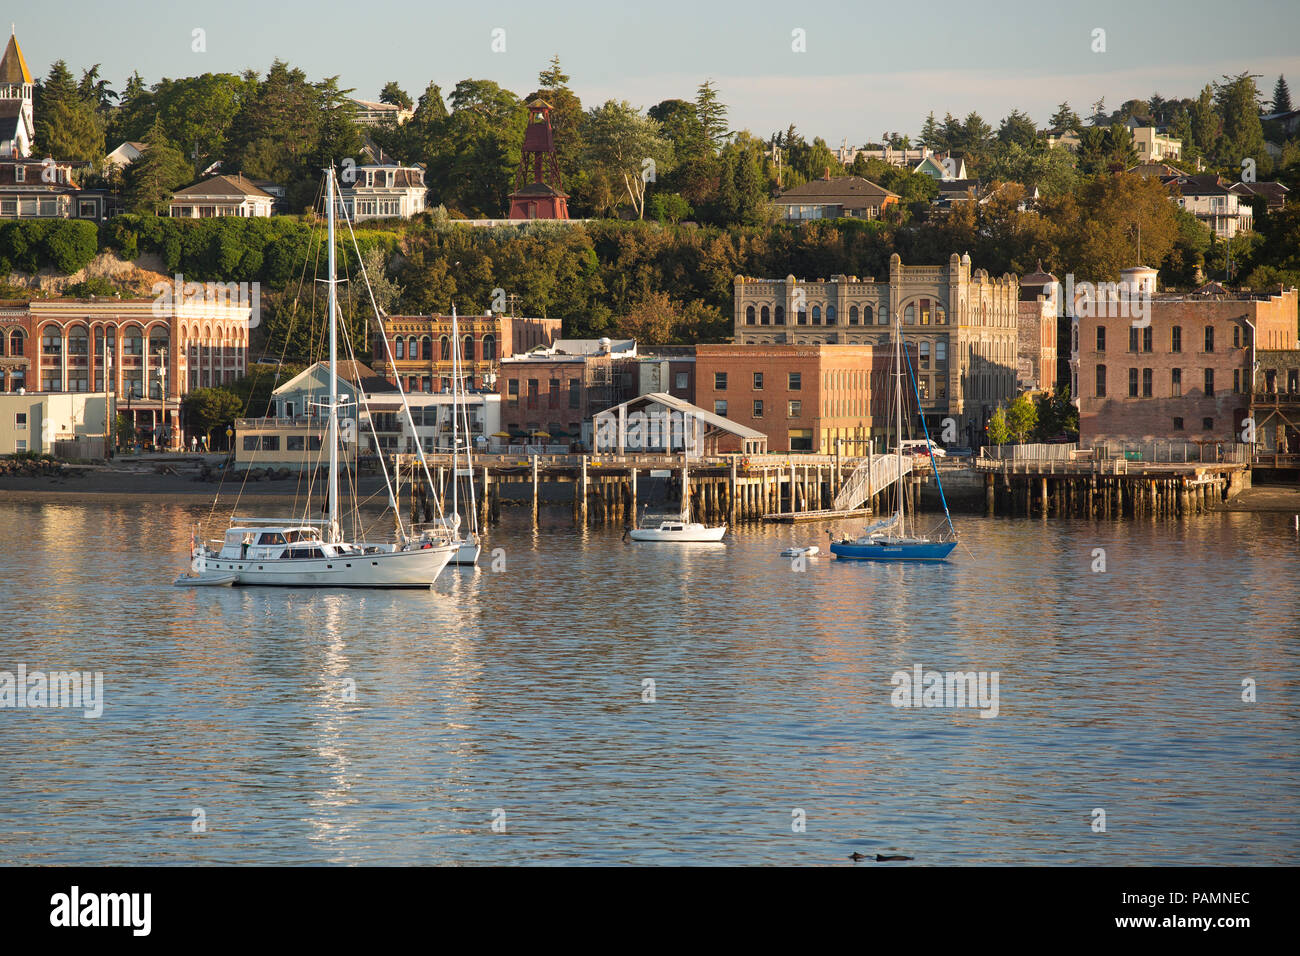 Port Townsend waterfront view from water with sailing boats at anchor. Stock Photo